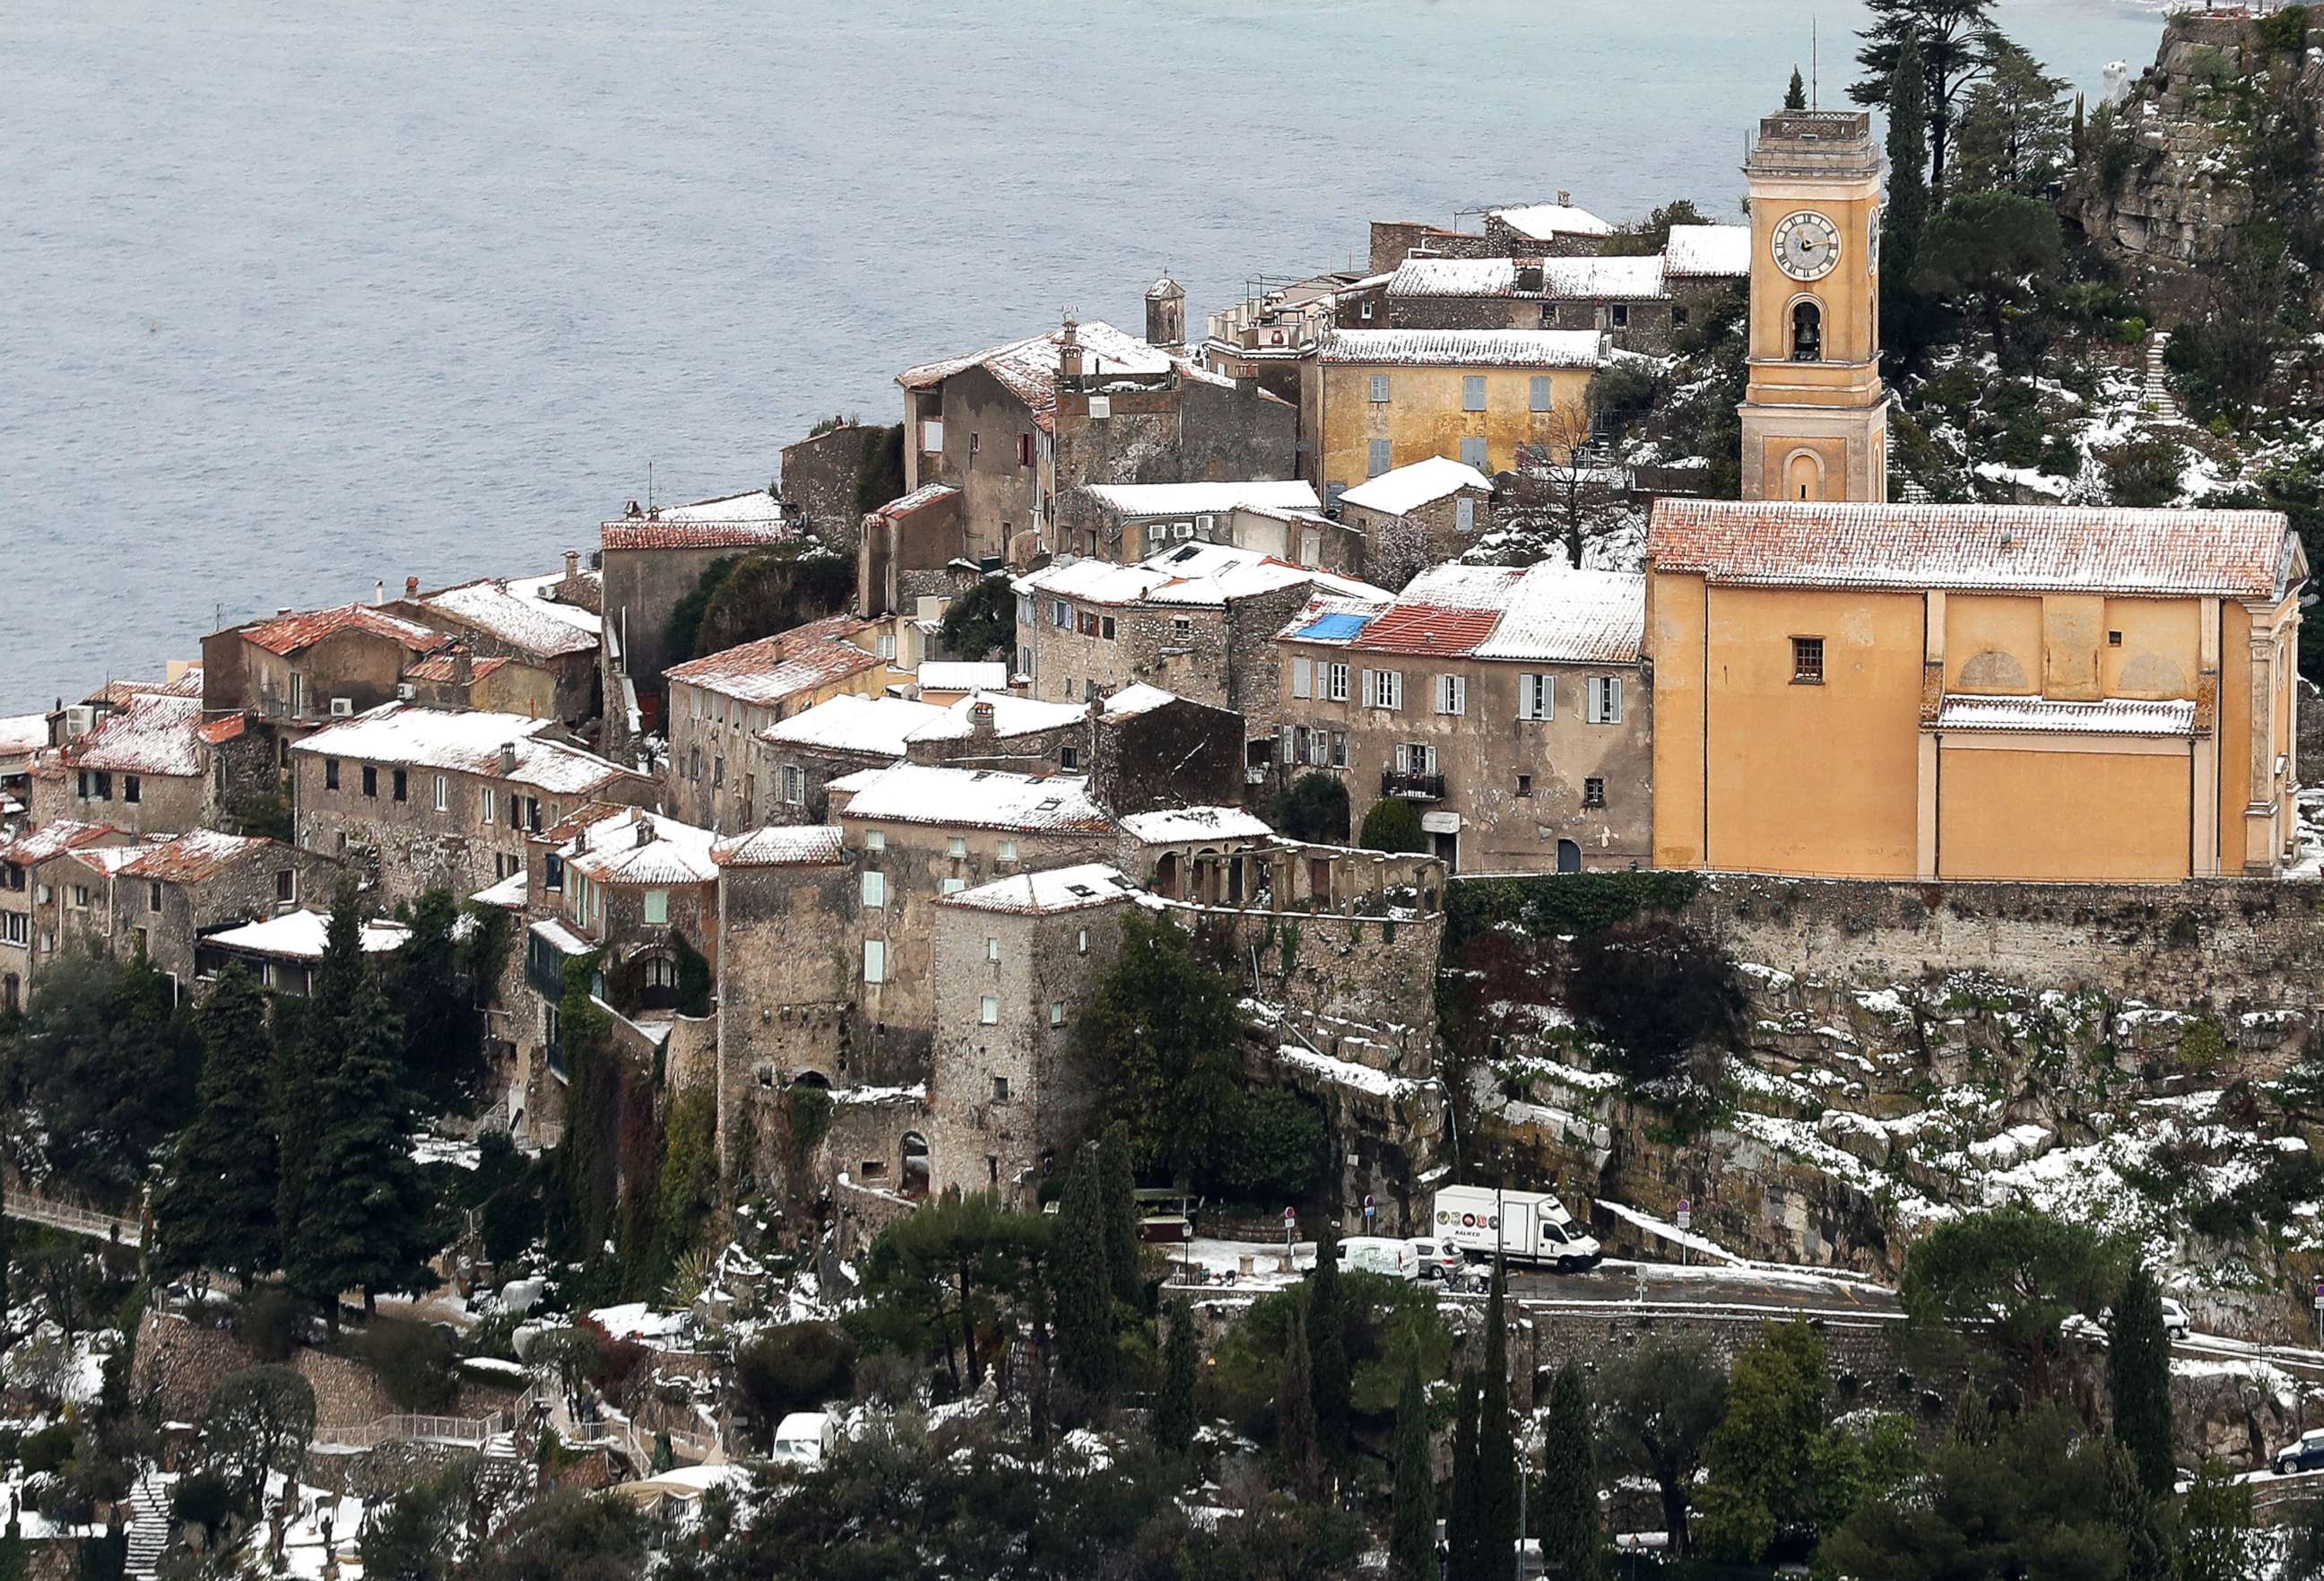 PHOTO: A view after a heavy snowfall, of Eze Village, southern France, March 1, 2018. Media reports state that extreme cold weather is forecast to hit many parts of Europe with temperatures plummeting to a possible ten year low.